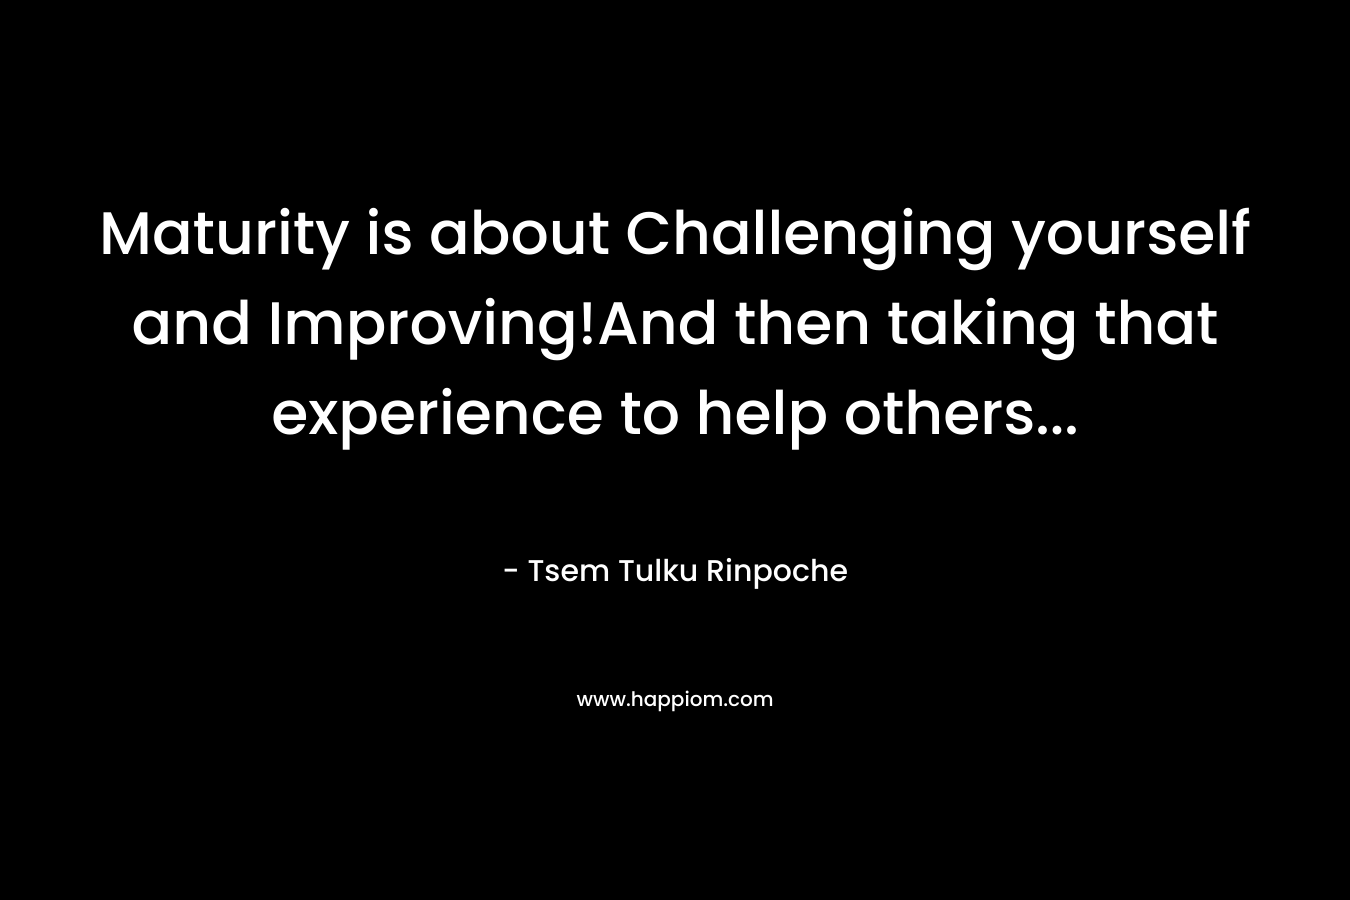 Maturity is about Challenging yourself and Improving!And then taking that experience to help others… – Tsem Tulku Rinpoche